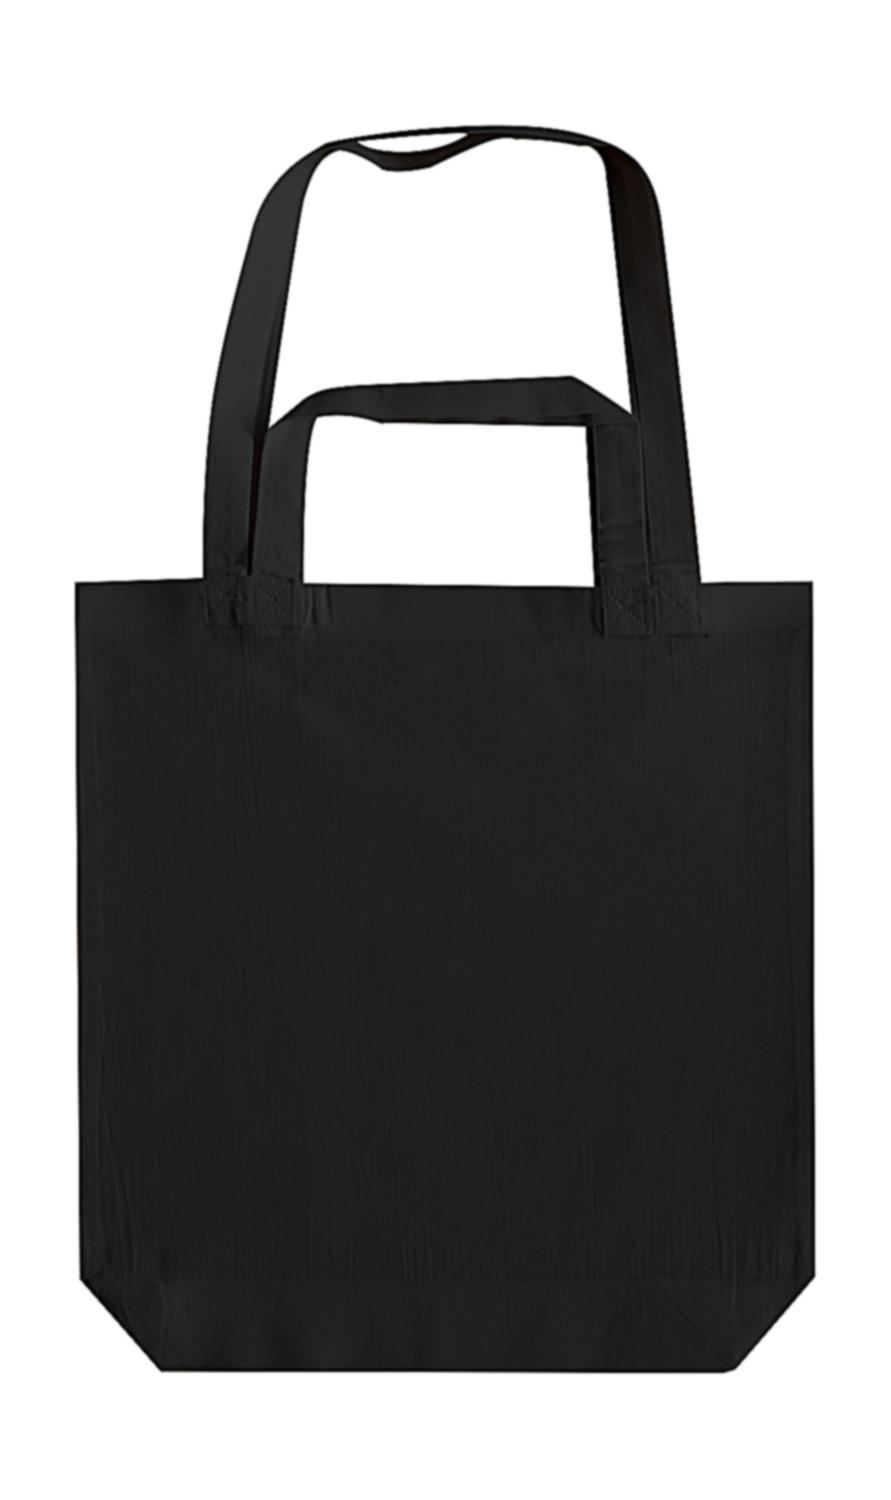  Double Handle Gusset Bag in Farbe Black